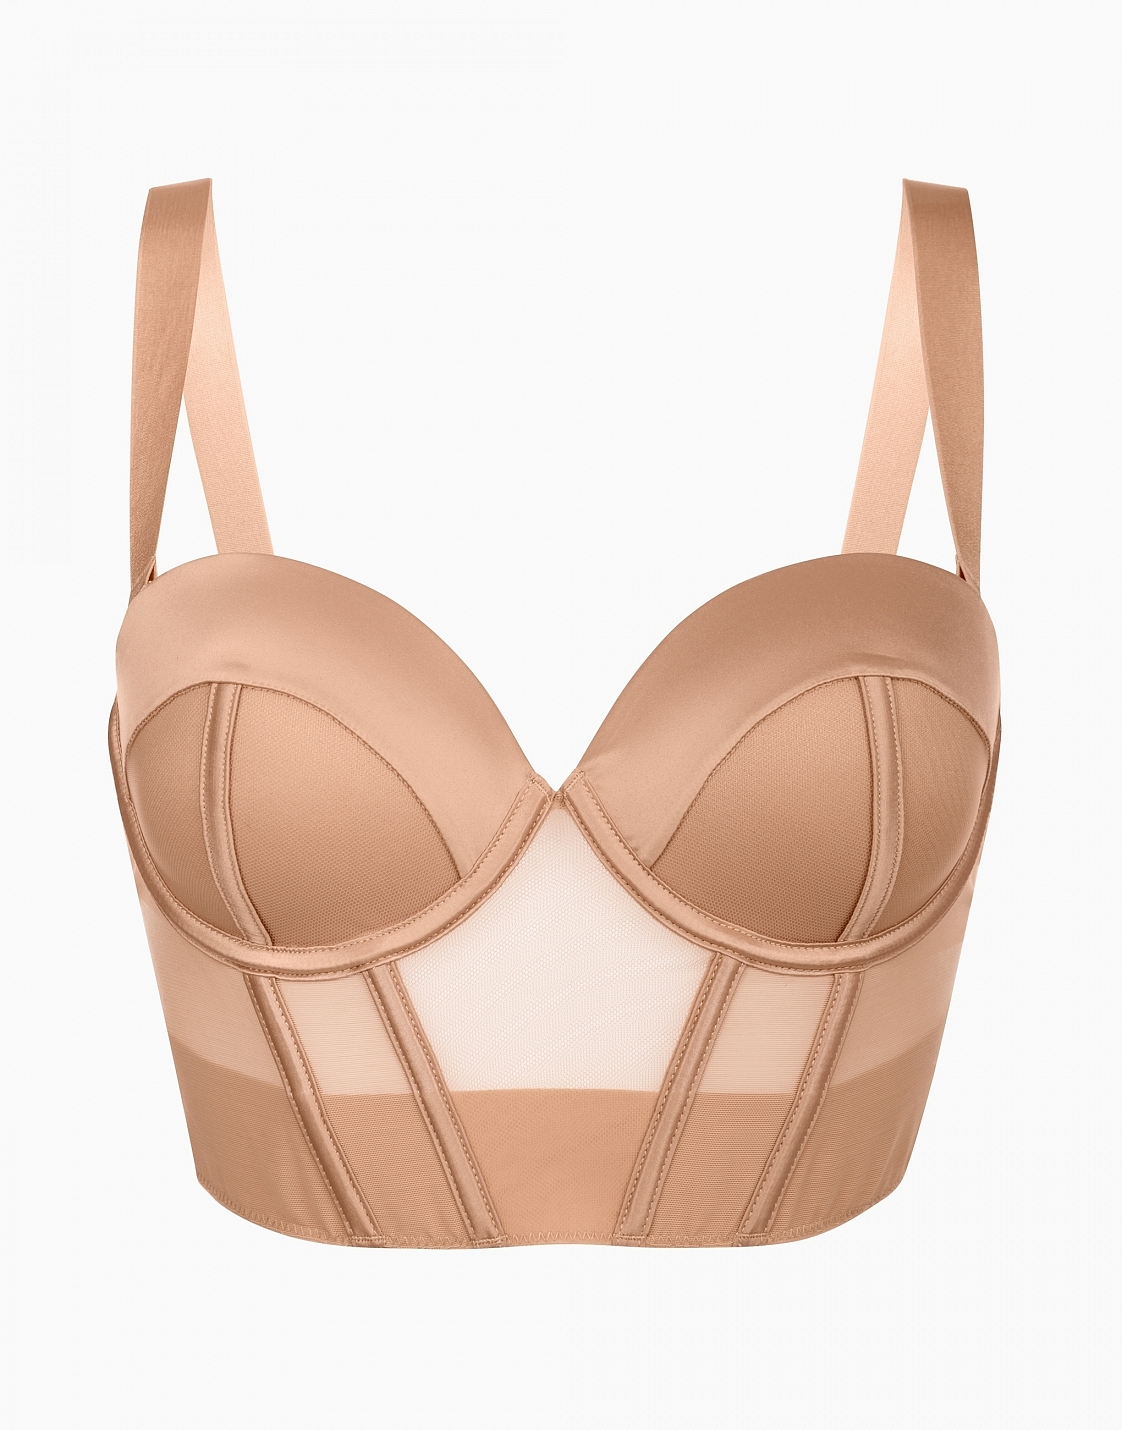 Push-up balconette bra with molded cups on a chestband CD155